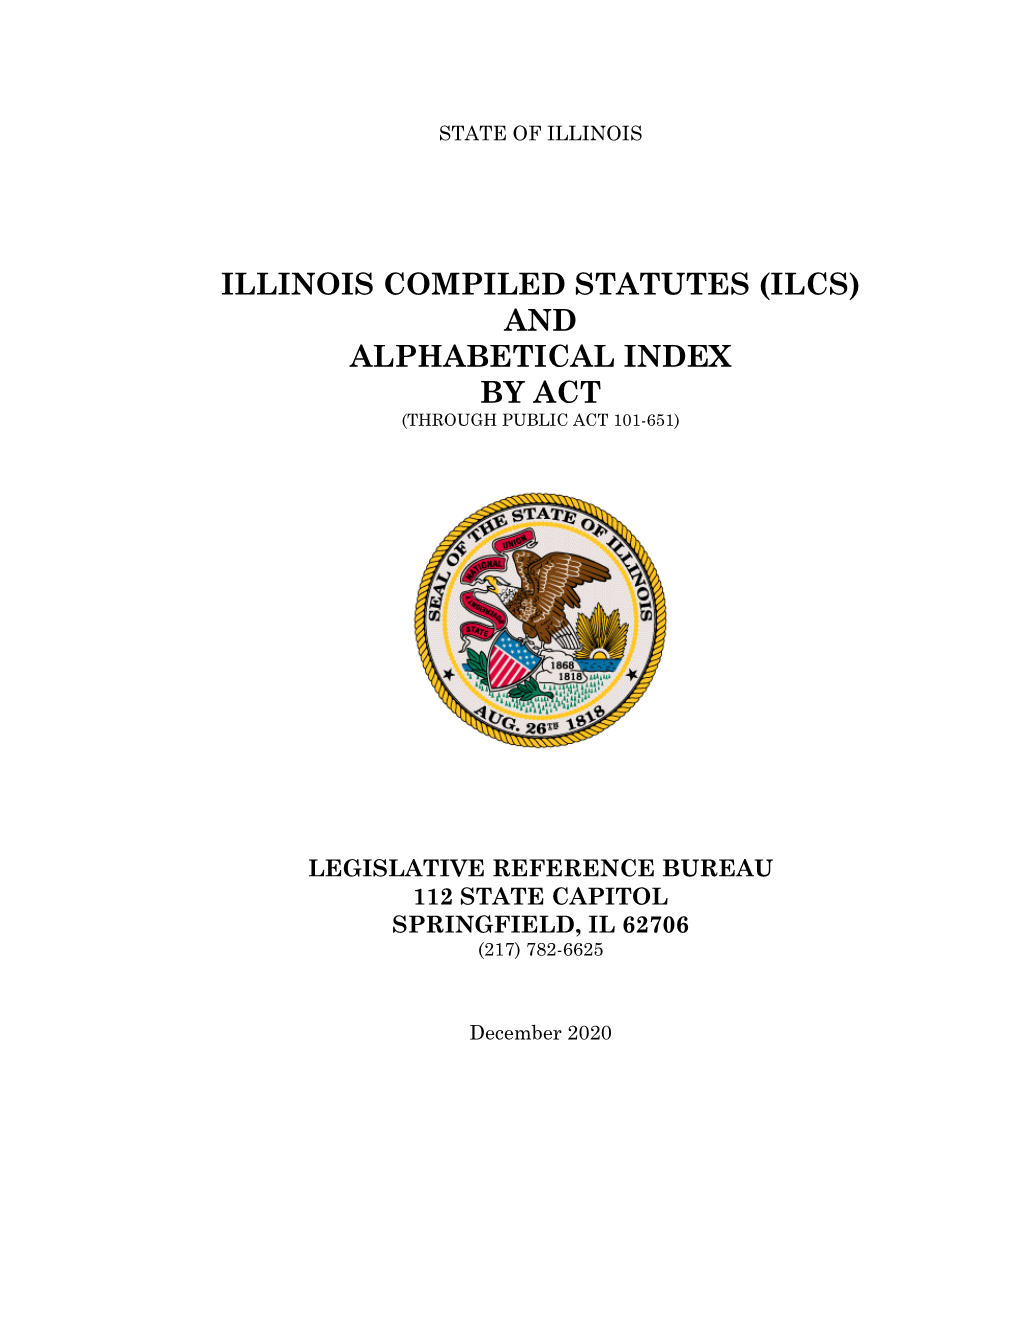 Illinois Compiled Statutes (Ilcs) and Alphabetical Index by Act (Through Public Act 101-651)